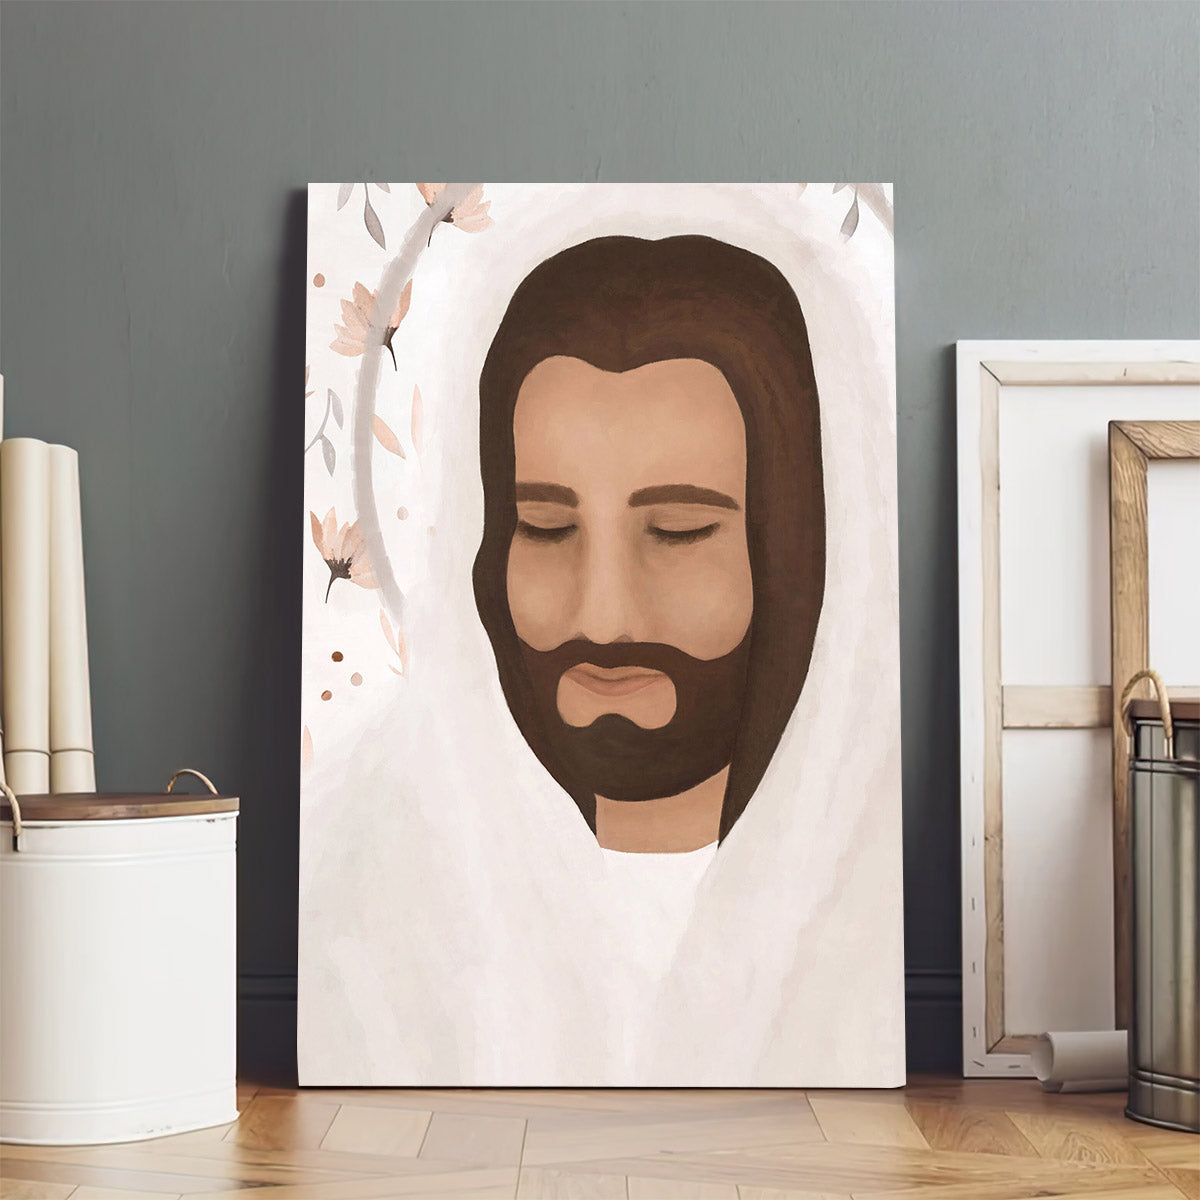 His Blessing Jesus - Canvas Pictures - Jesus Canvas Art - Christian Wall Art